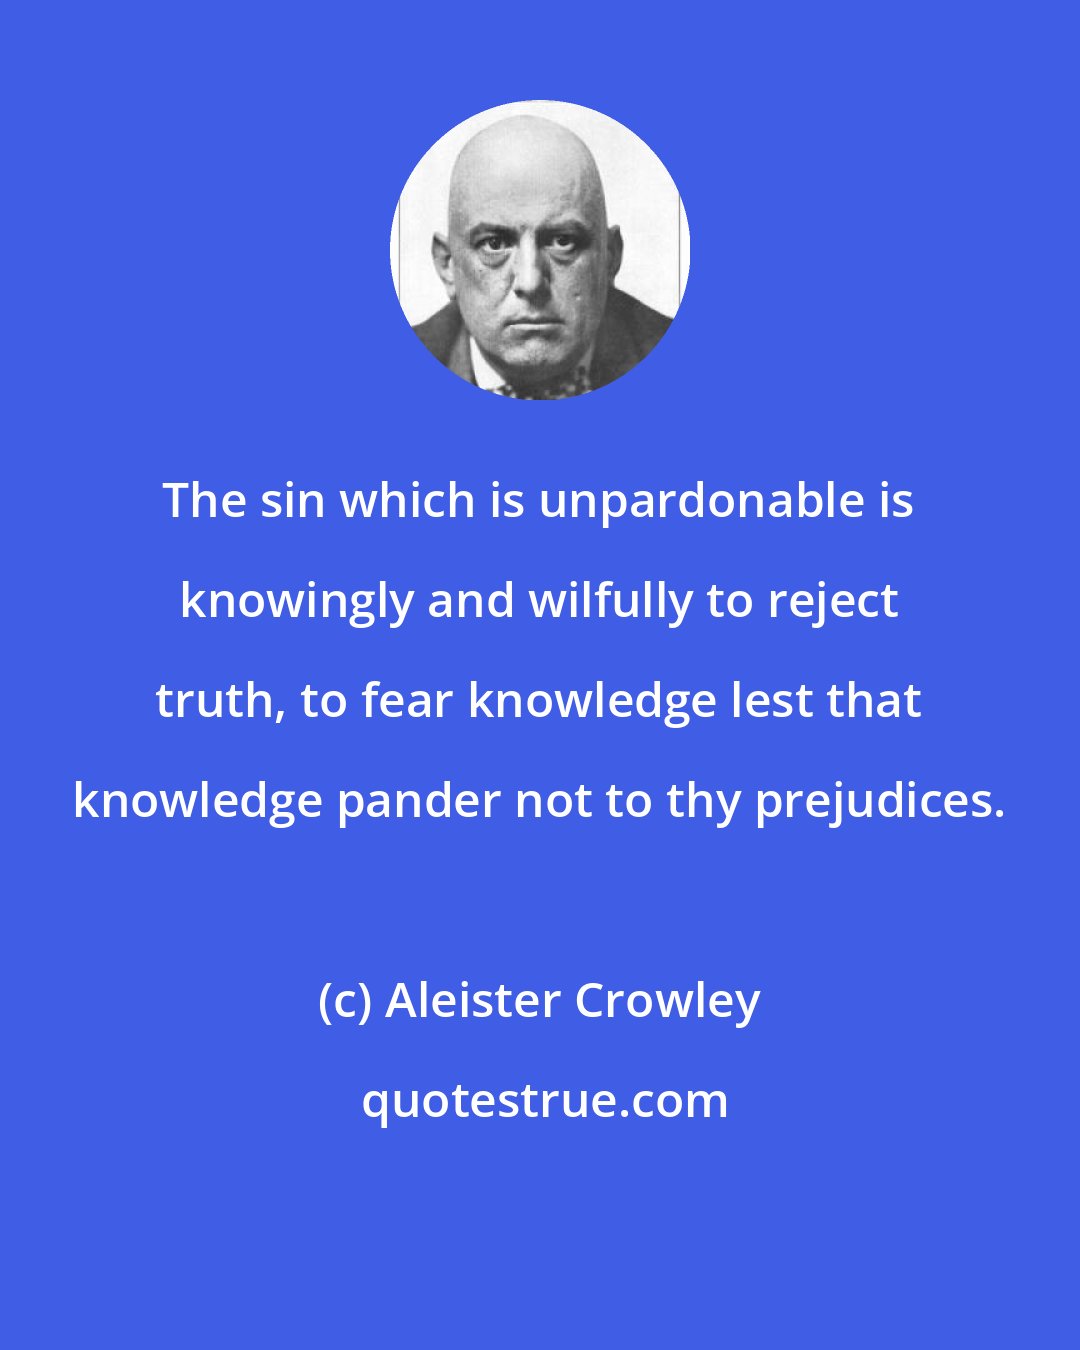 Aleister Crowley: The sin which is unpardonable is knowingly and wilfully to reject truth, to fear knowledge lest that knowledge pander not to thy prejudices.